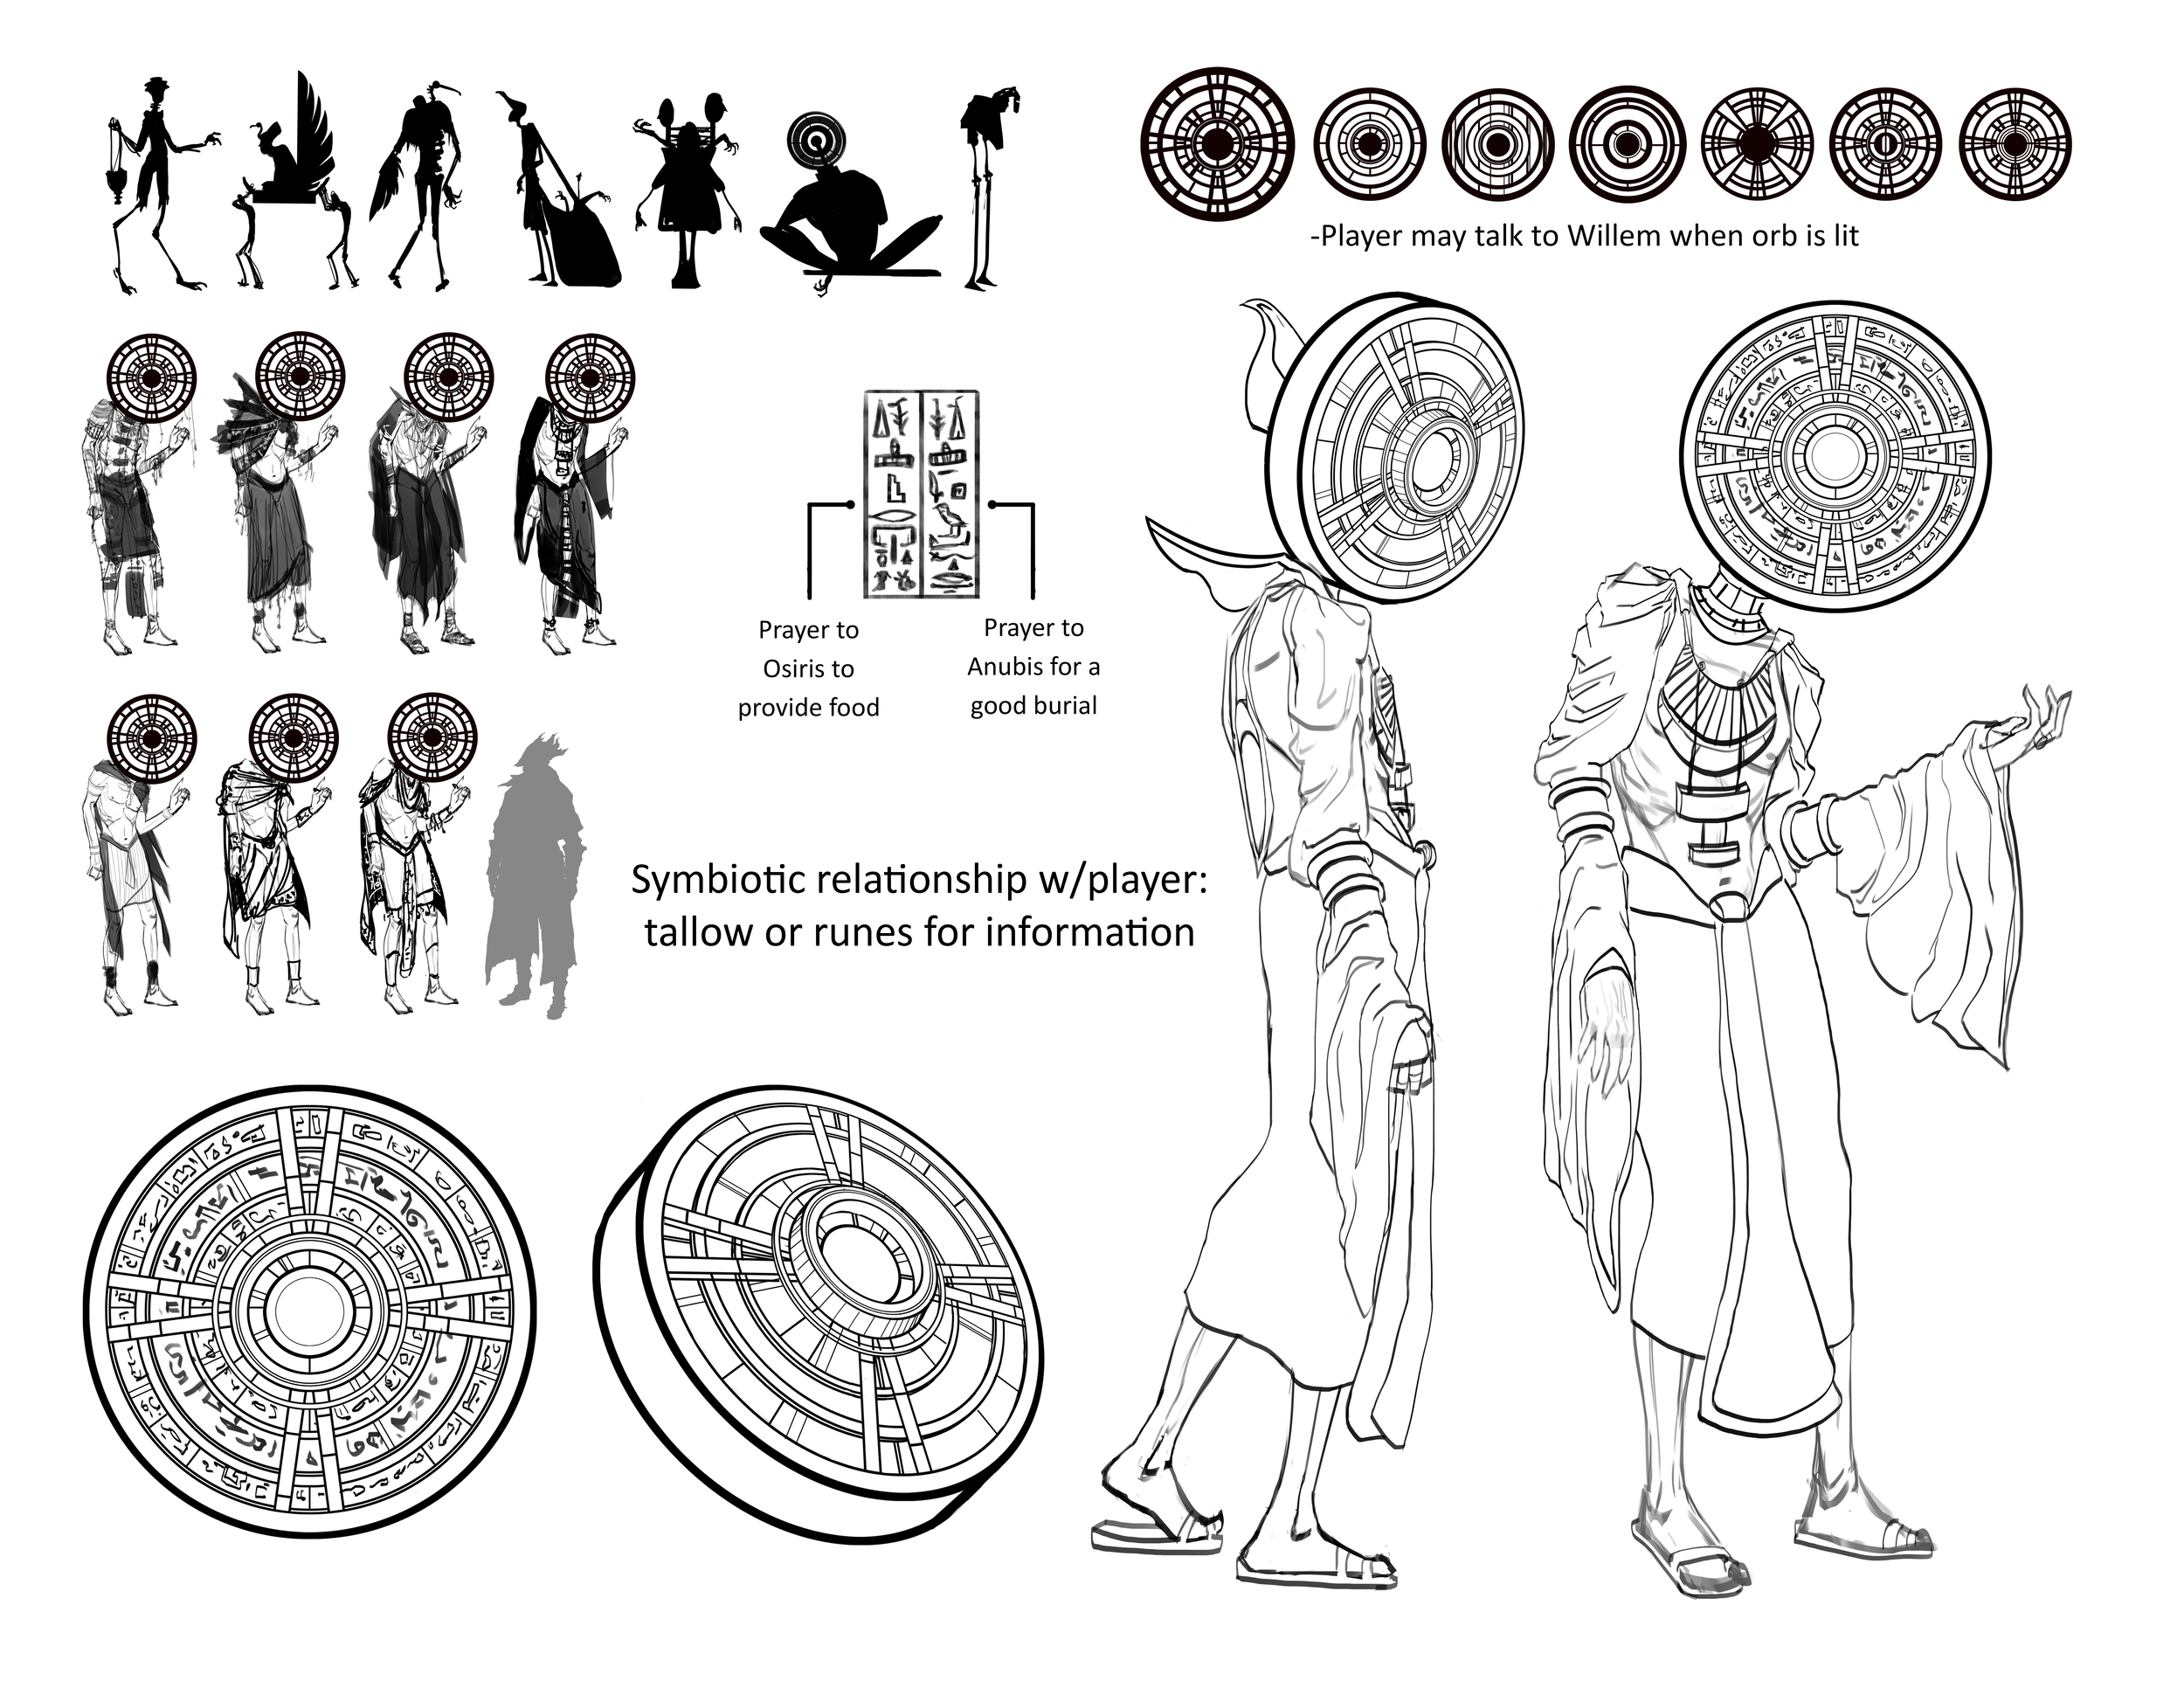 different designs for the sundial on the characters face